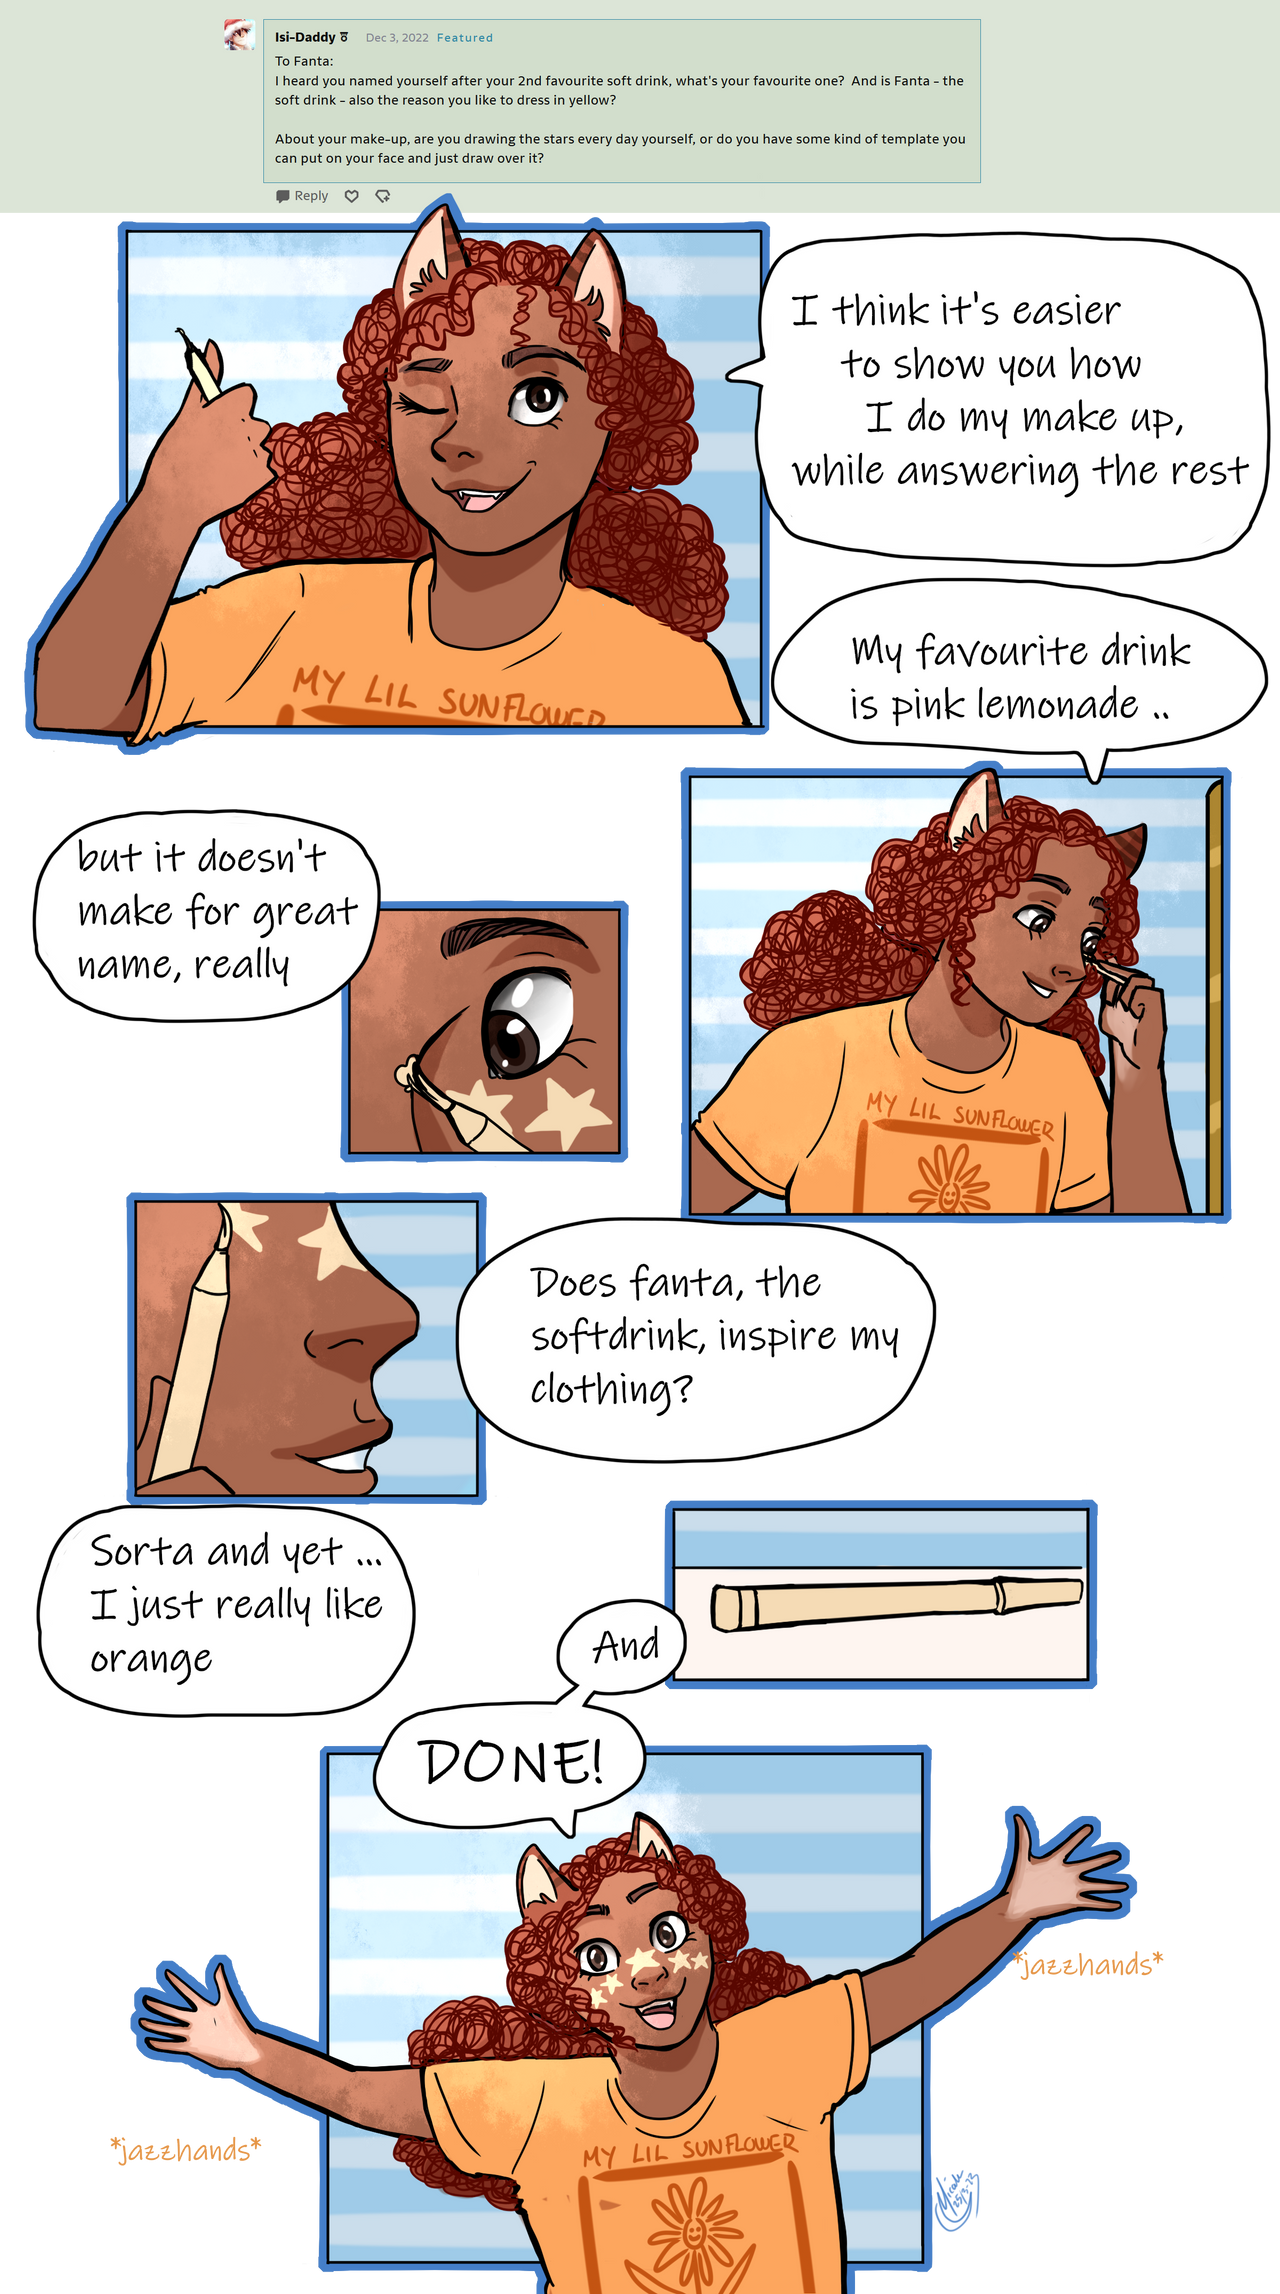 Tailwag Sidestory - First Impressions Page 3 by MicahandtheMoon on  DeviantArt